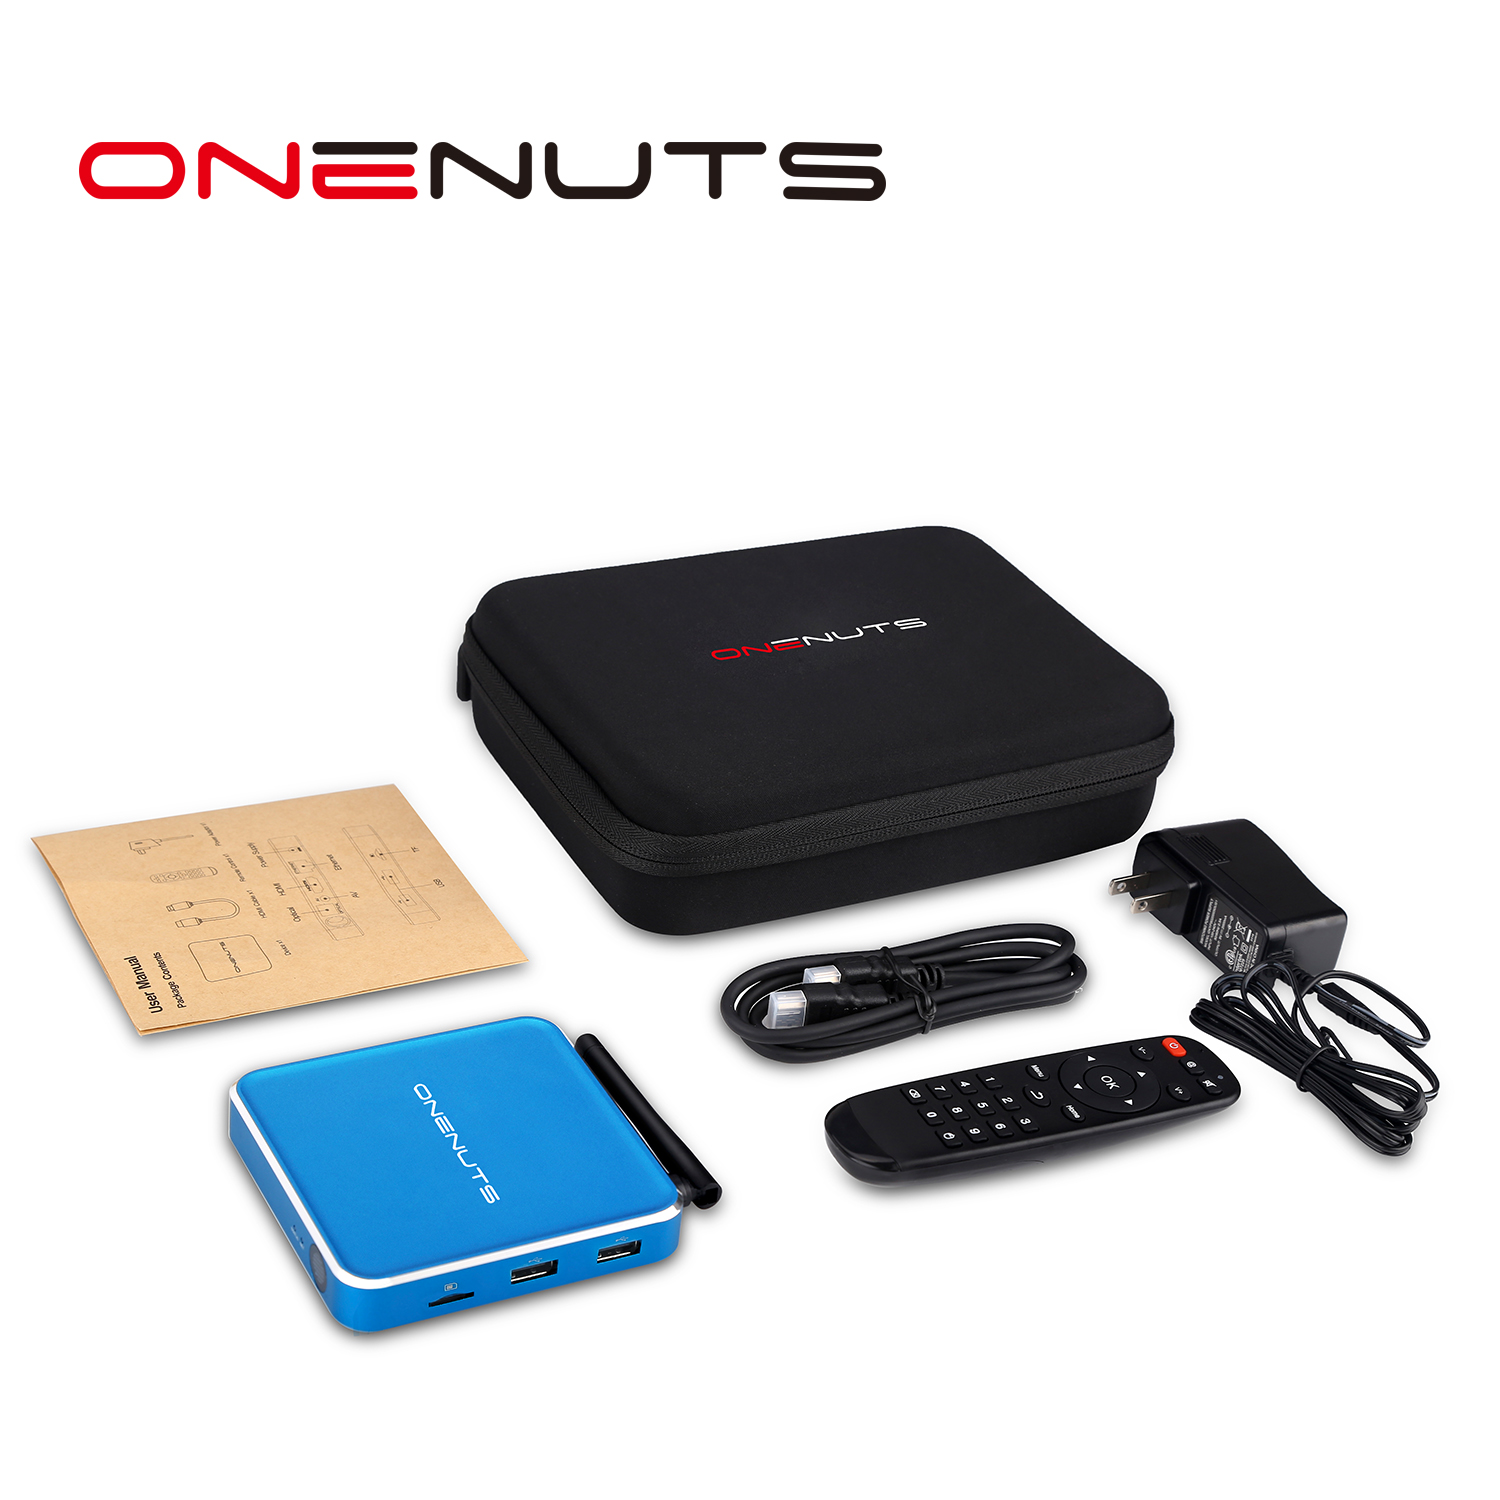 Android TV BOXES wholesale china, Android TV BOX support 4G donlge